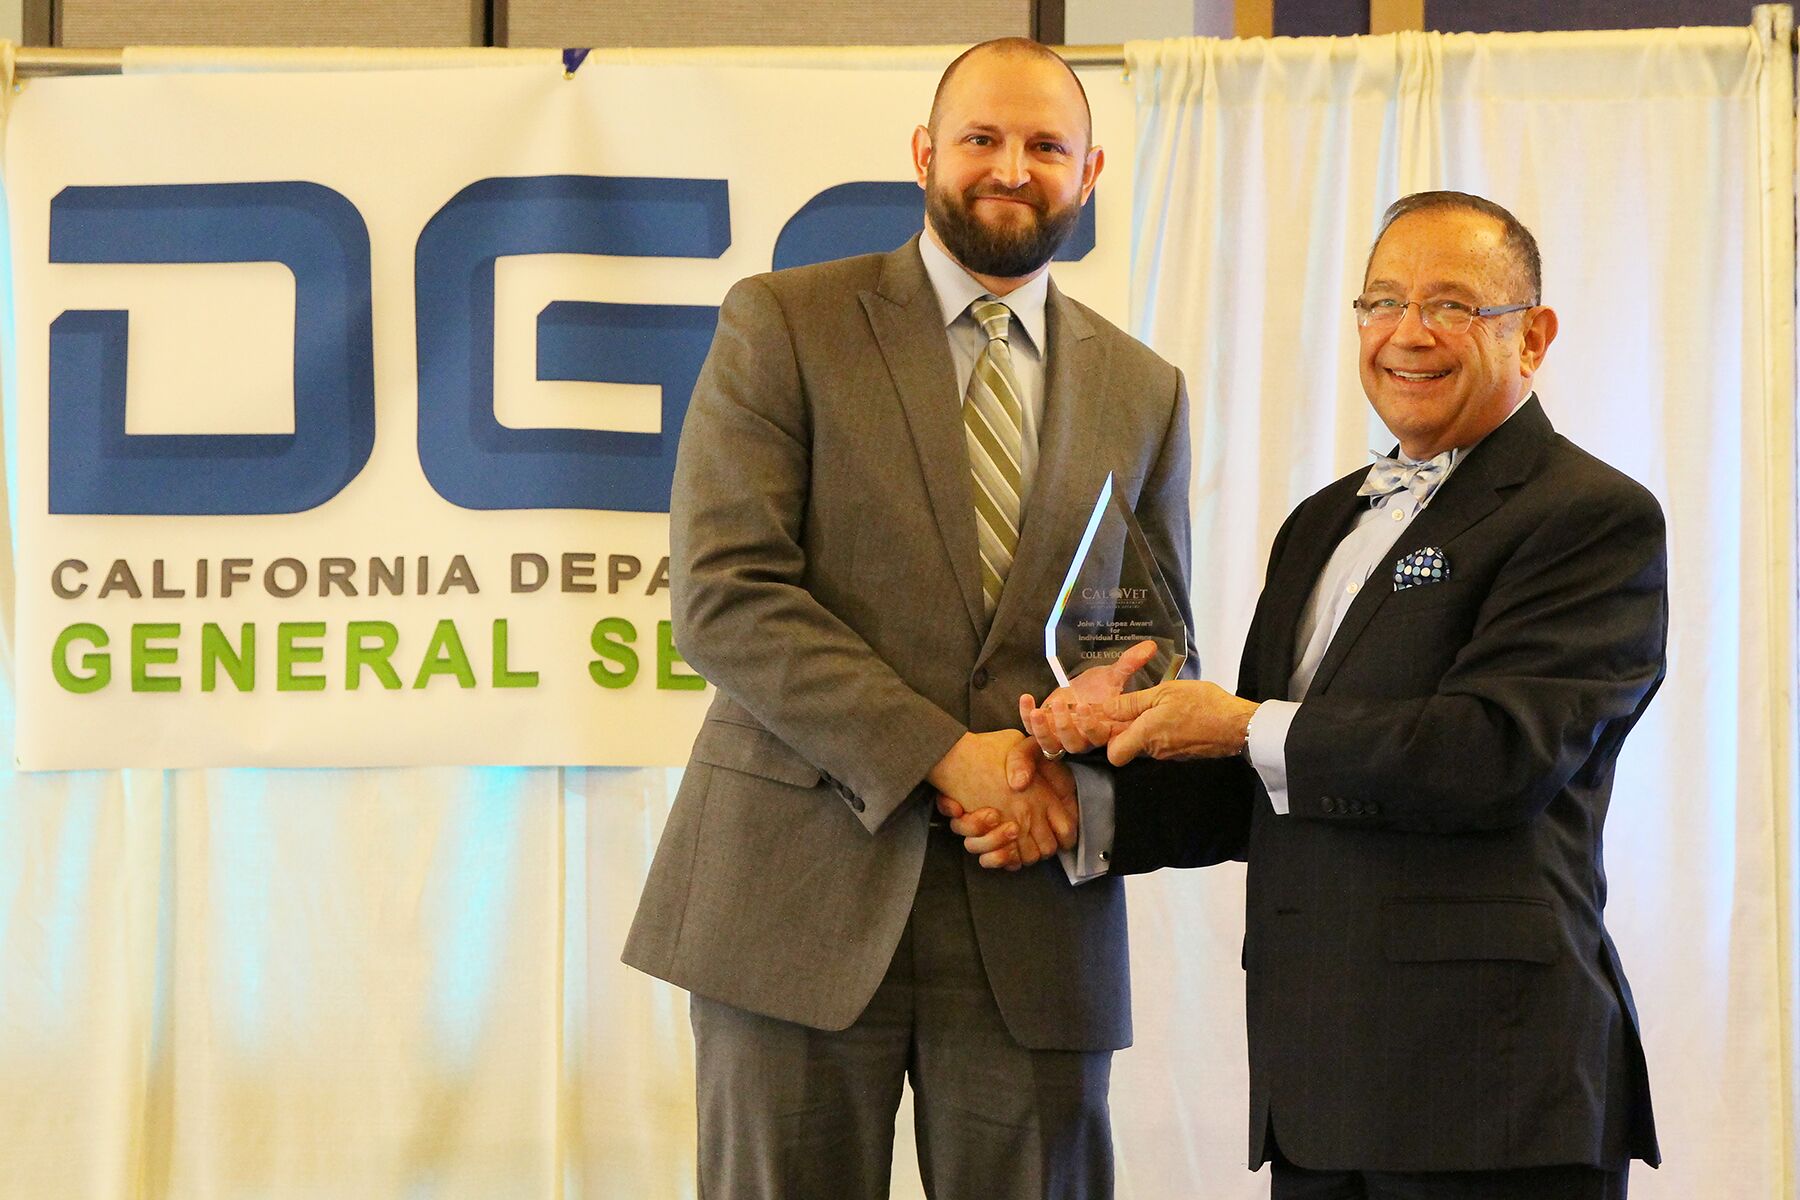 Cole Woodman, Global Engineering Services, Inc. accepts the John K. Lopez Award for individual business excellence